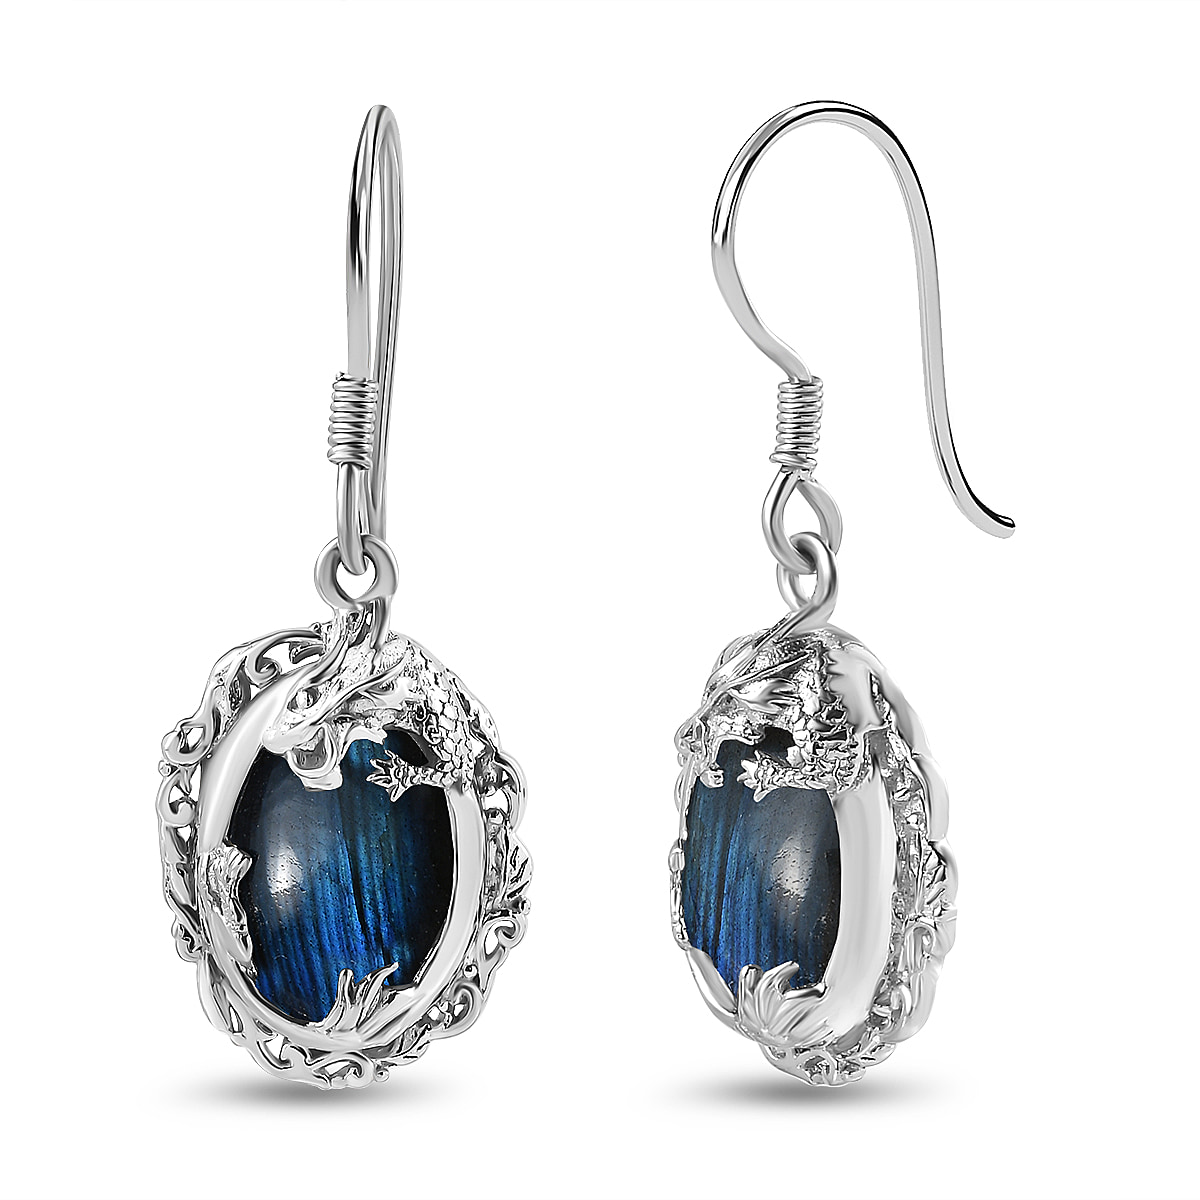 Labradorite Solitaire Dragon Earrings in Platinum Overlay Sterling Silver 14.00 Ct, Silver Wt 6.80 GM